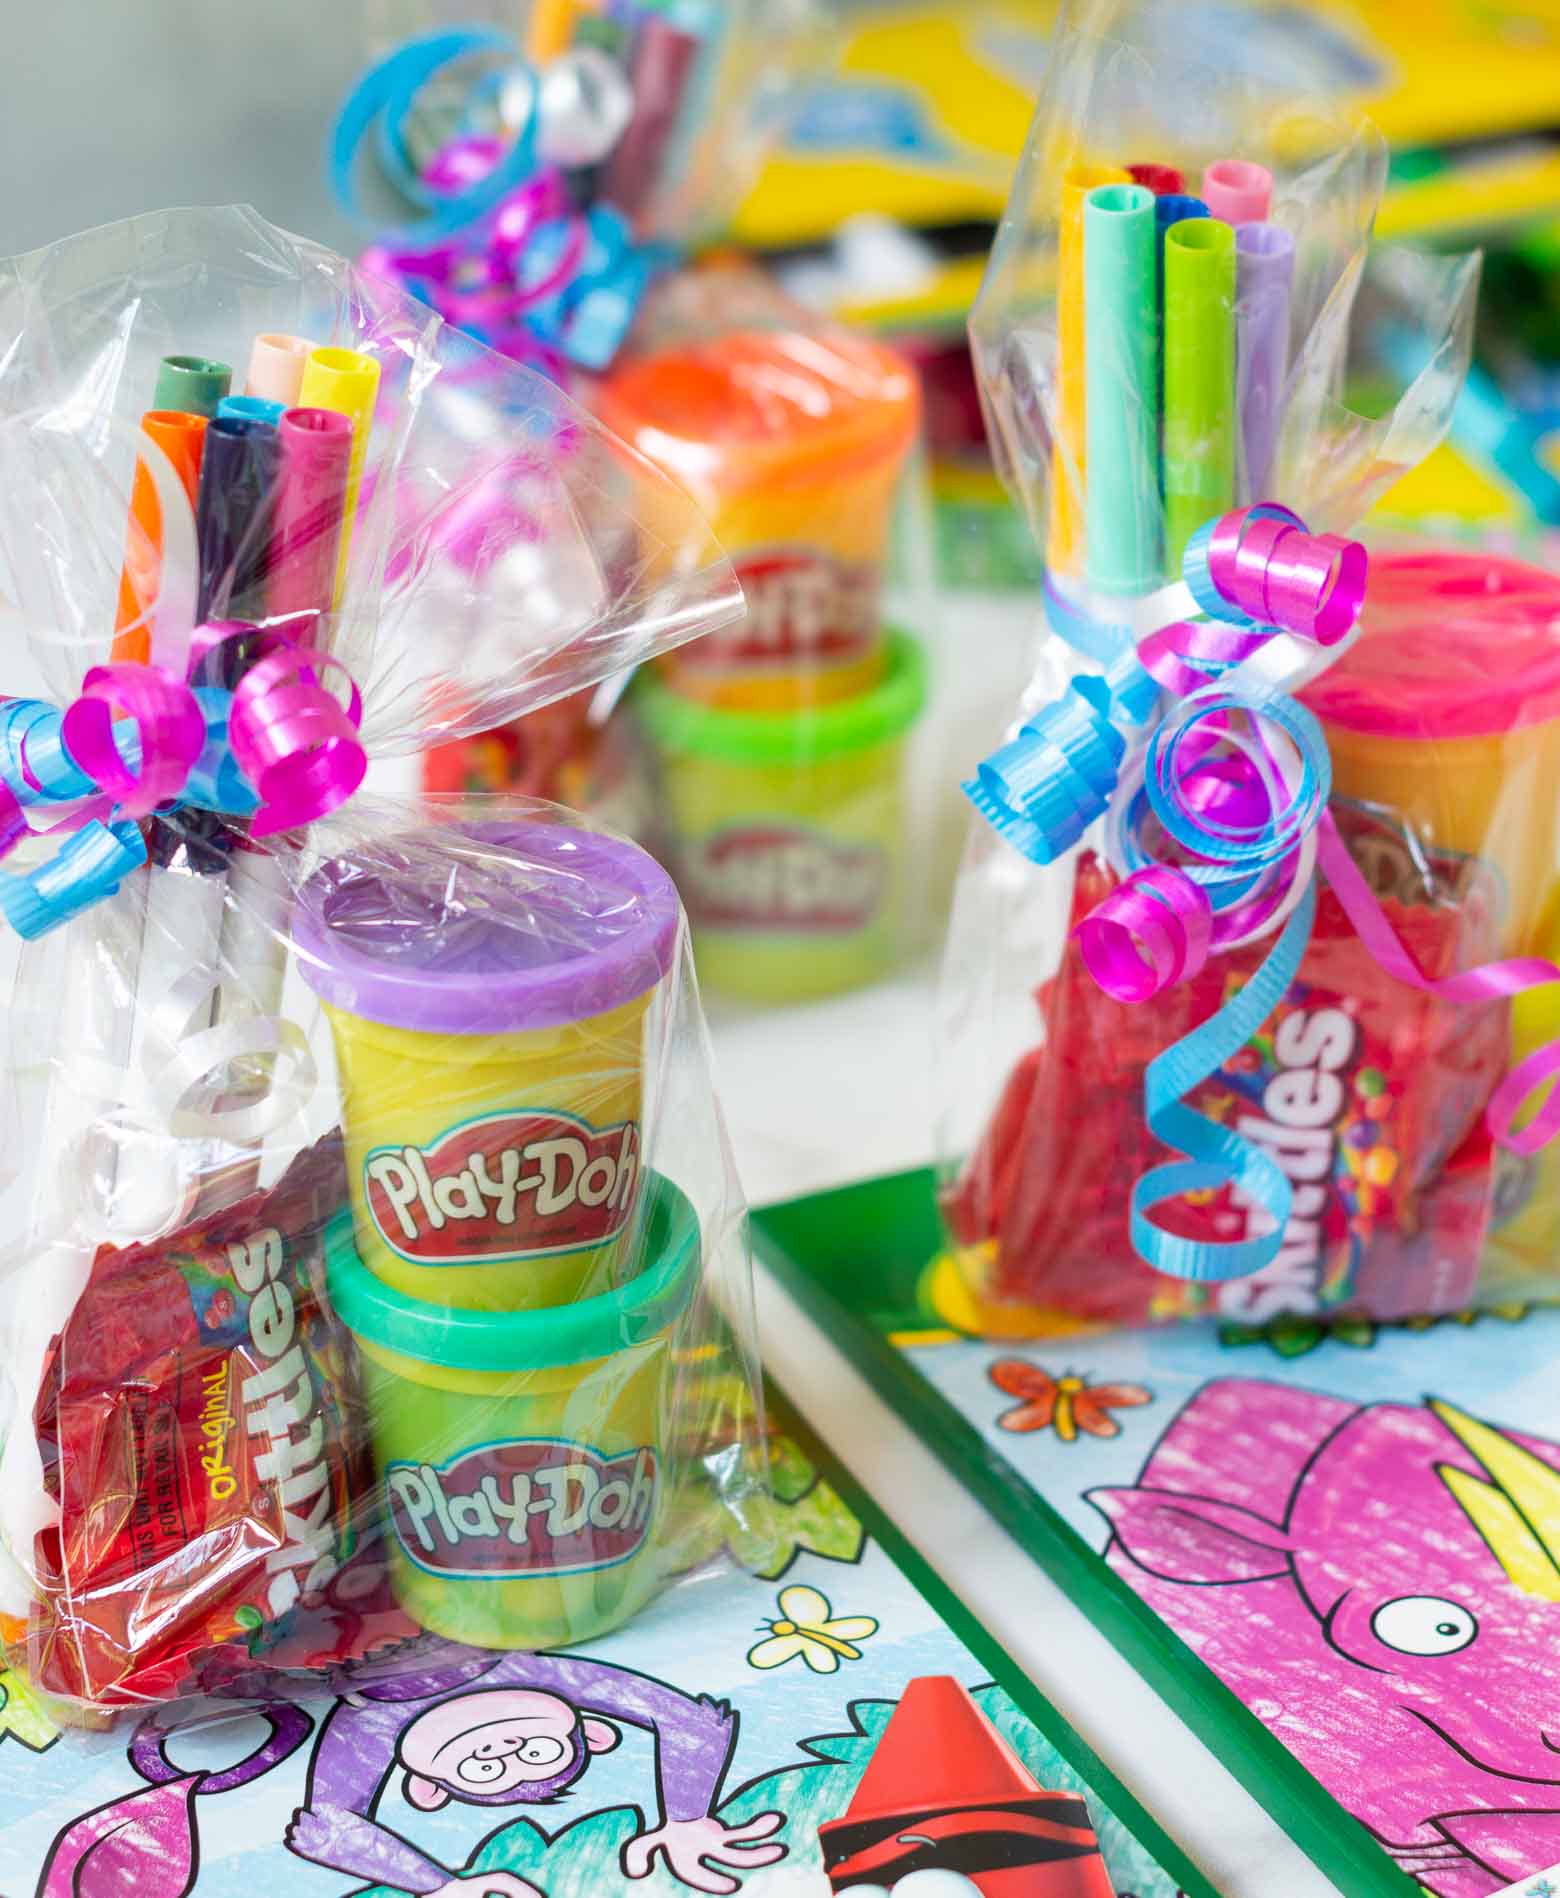 Preschool and Kids Party Favor Themes and Ideas!